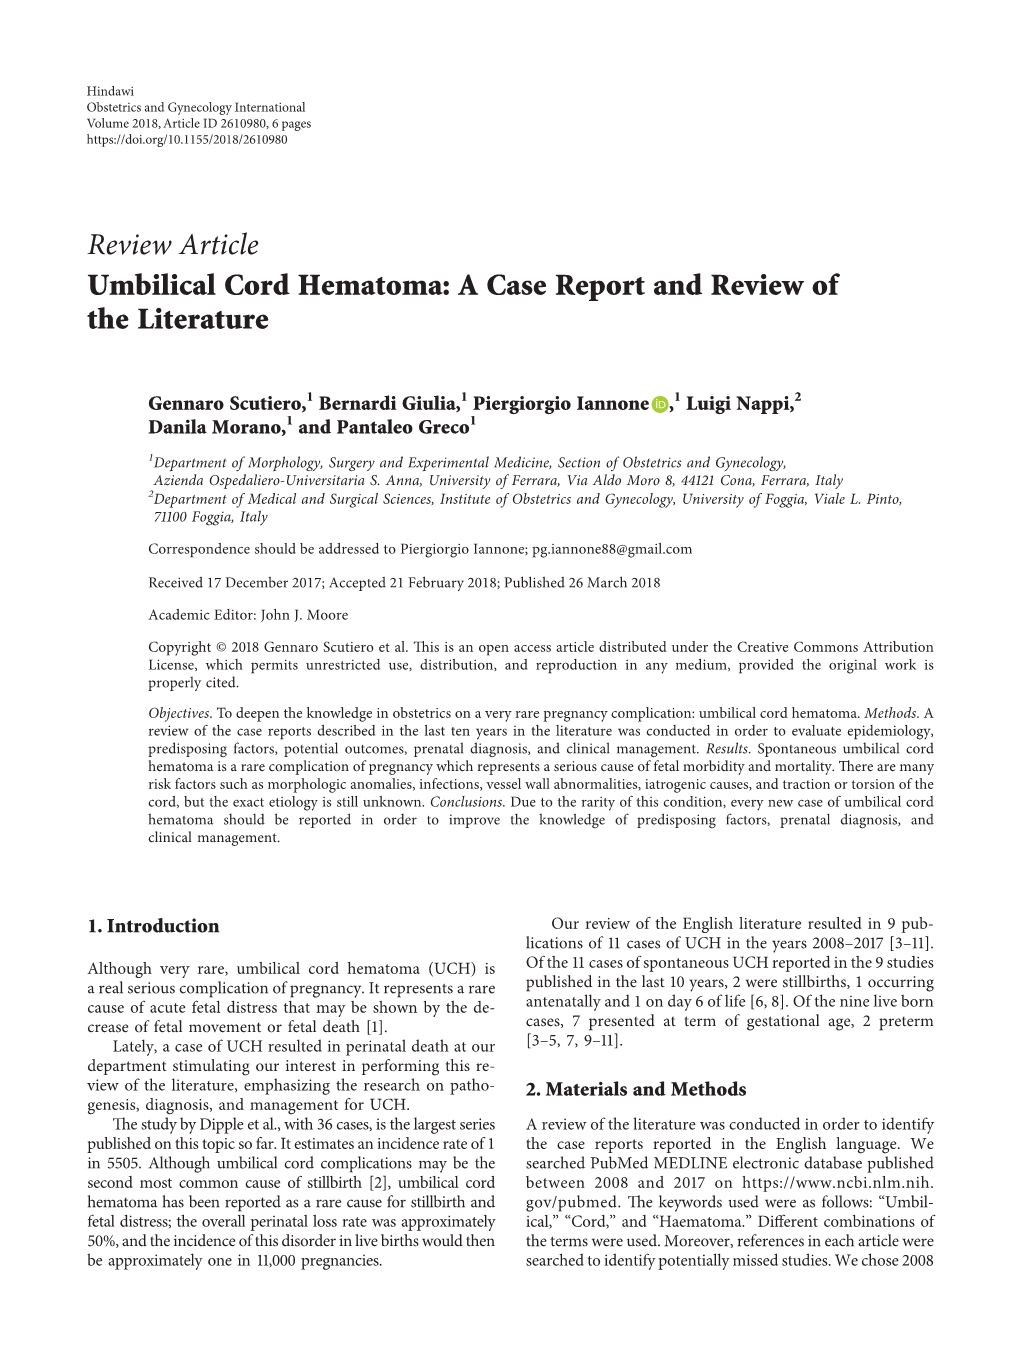 Review Article Umbilical Cord Hematoma: a Case Report and Review of the Literature